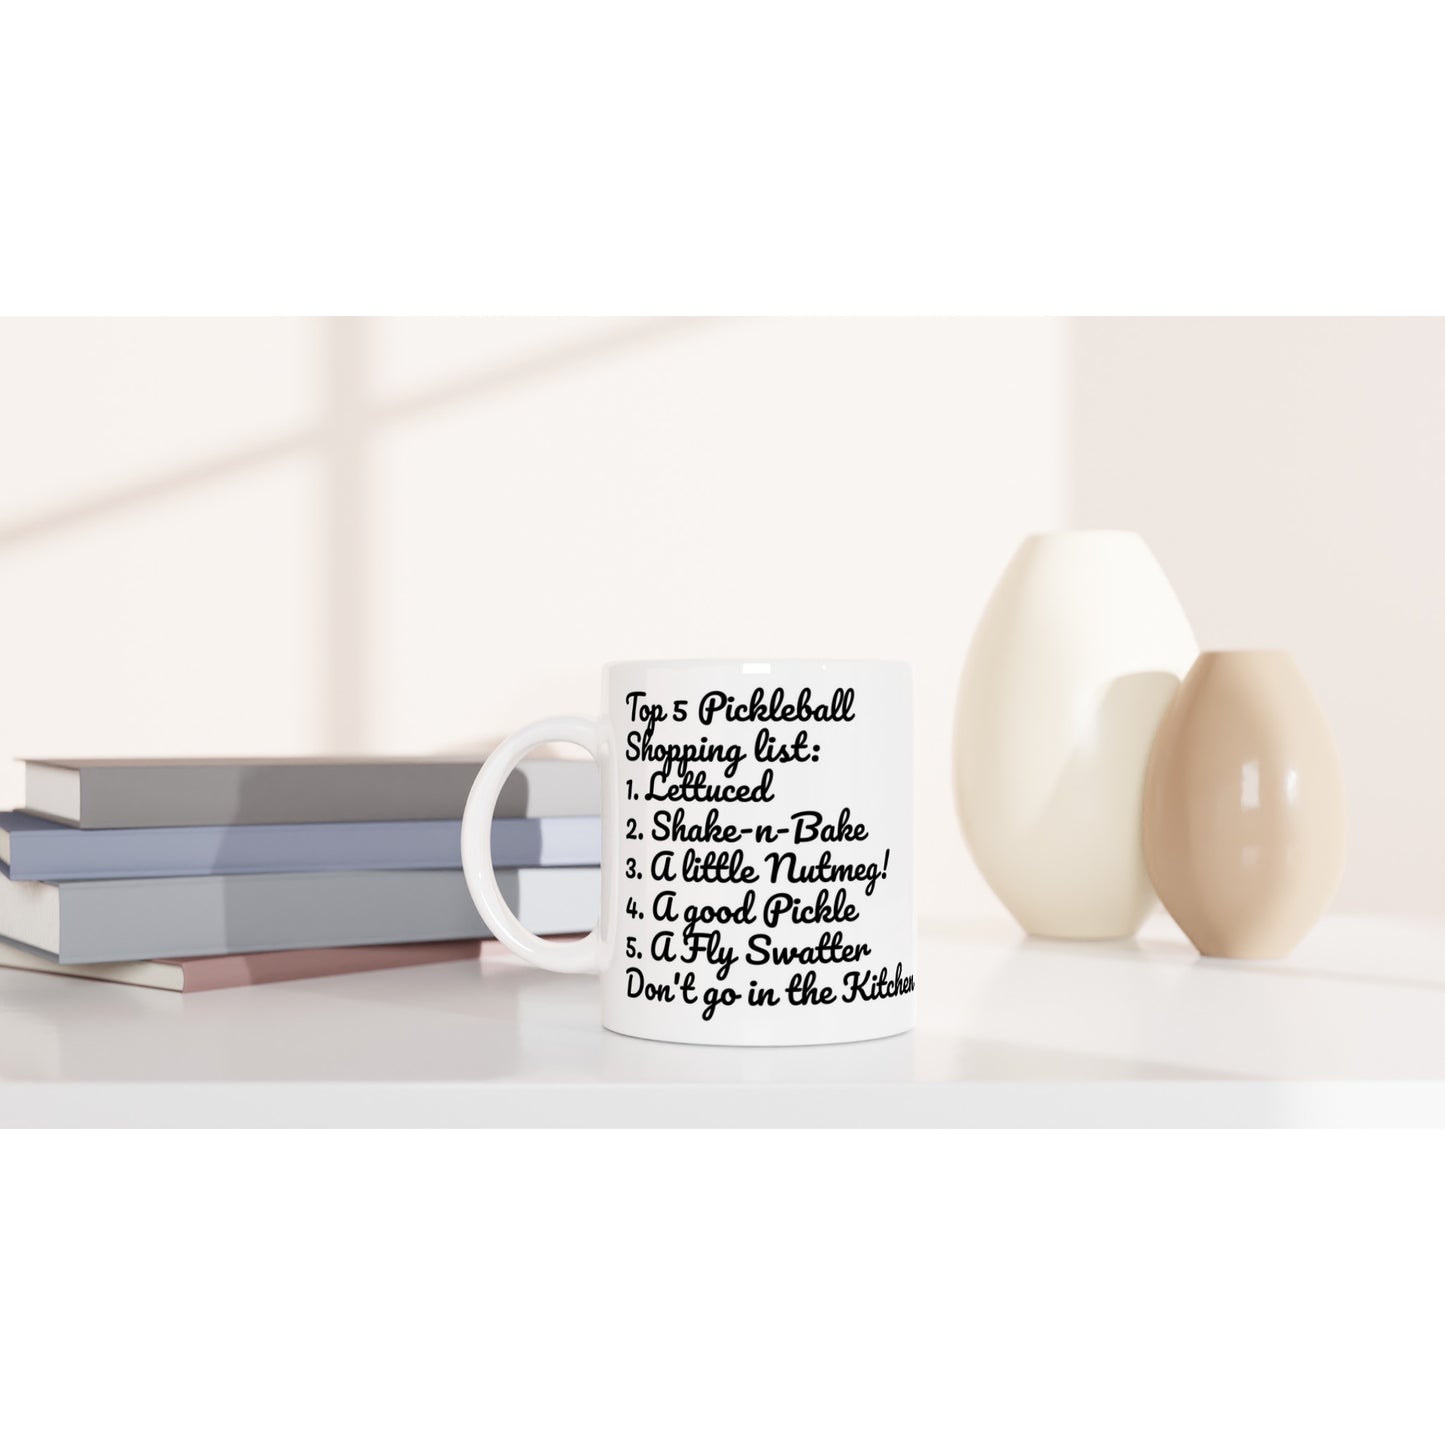 White ceramic 11oz mug with original motto Top 5 Pickleball Shopping list lettuce, Shake-n-bake, Nutmeg, Pickle, a Fly Swatter Don’t go in the kitchen on front and Let's Play Pickleball logo on back dishwasher and microwave safe from WhatYa Say Apparel sitting on coffee table with books and two vases. 